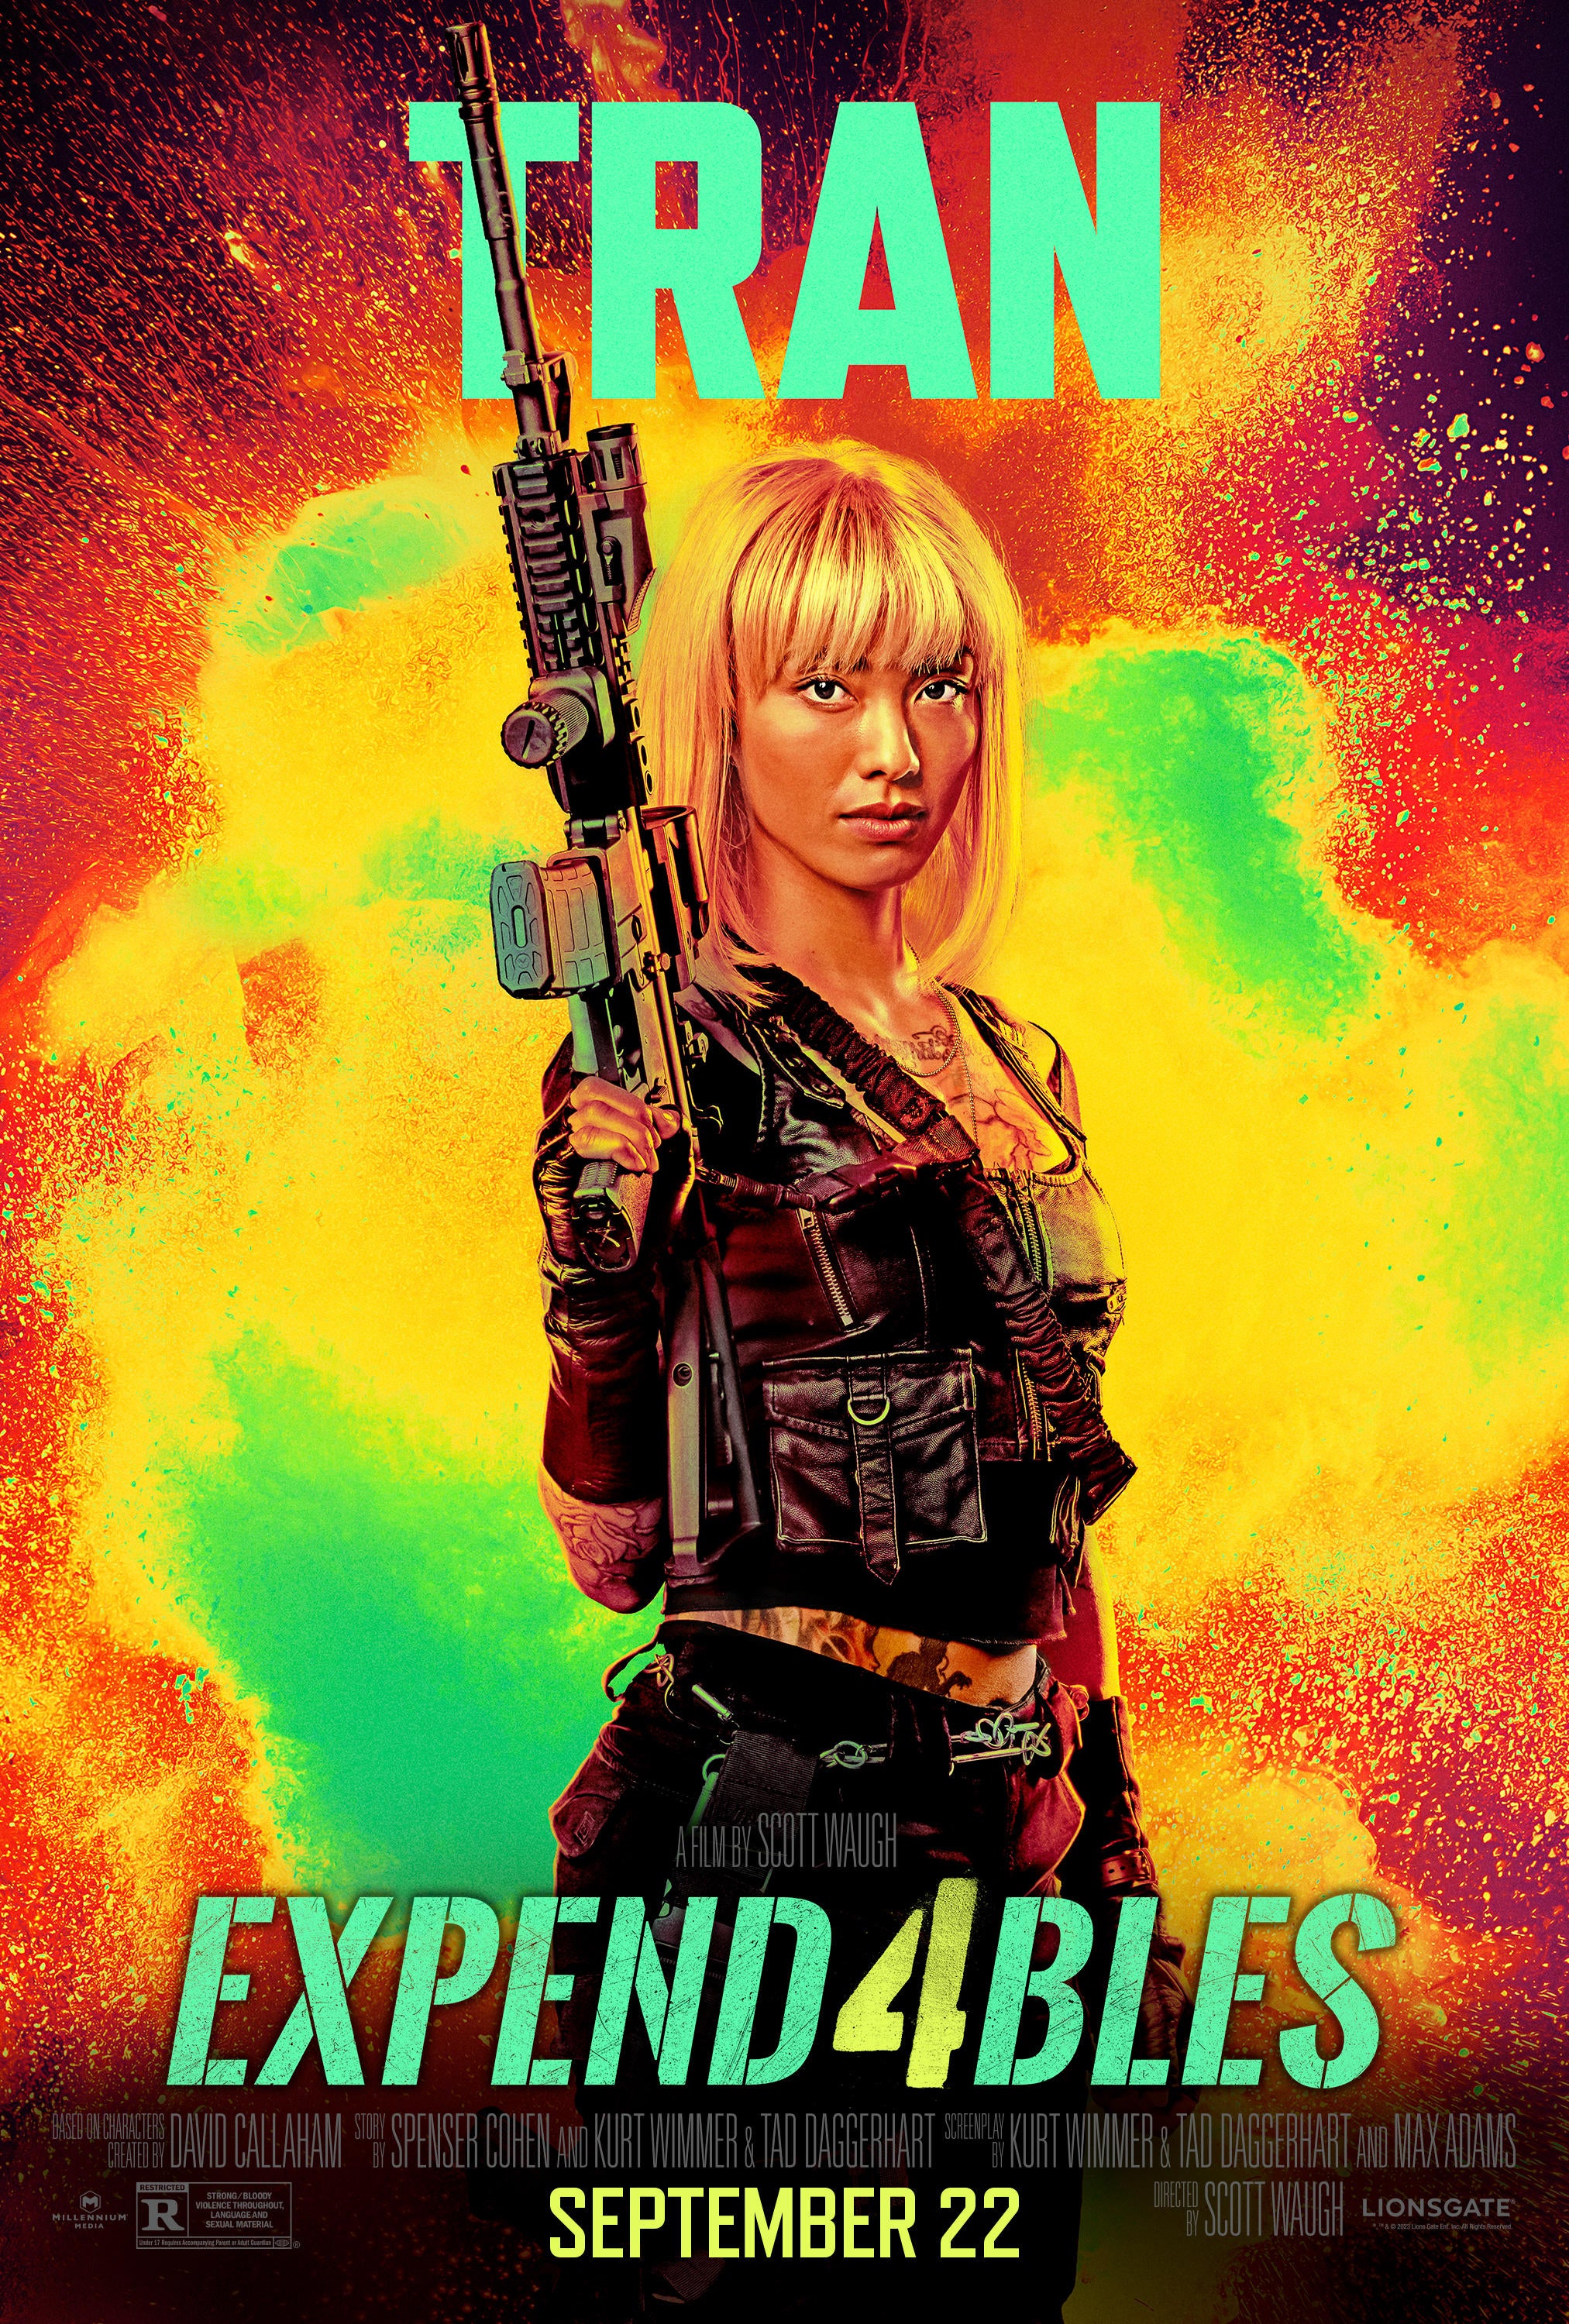 expendables-4-poster-levy-tran.jpg